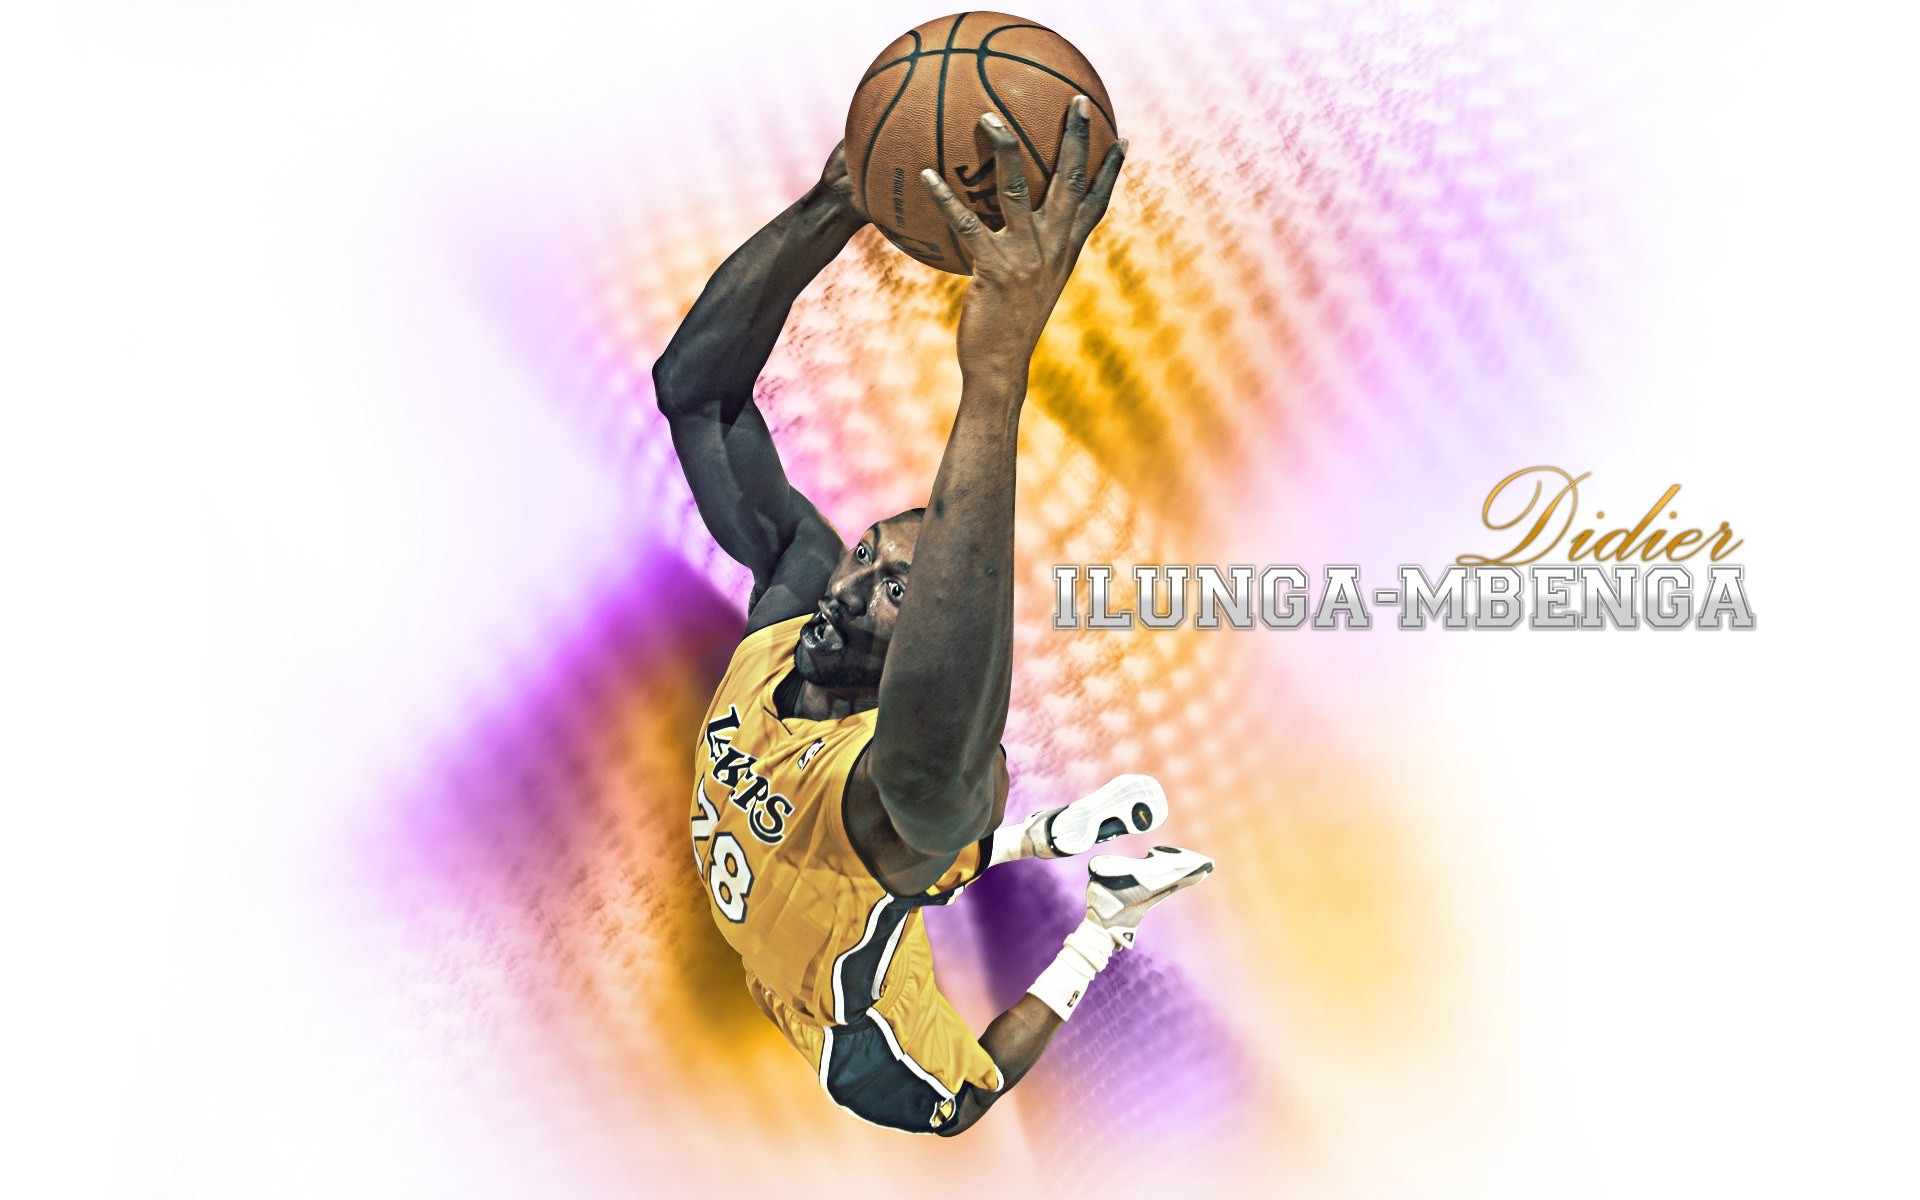 Los Angeles Lakers Official Wallpaper #9 - 1920x1200